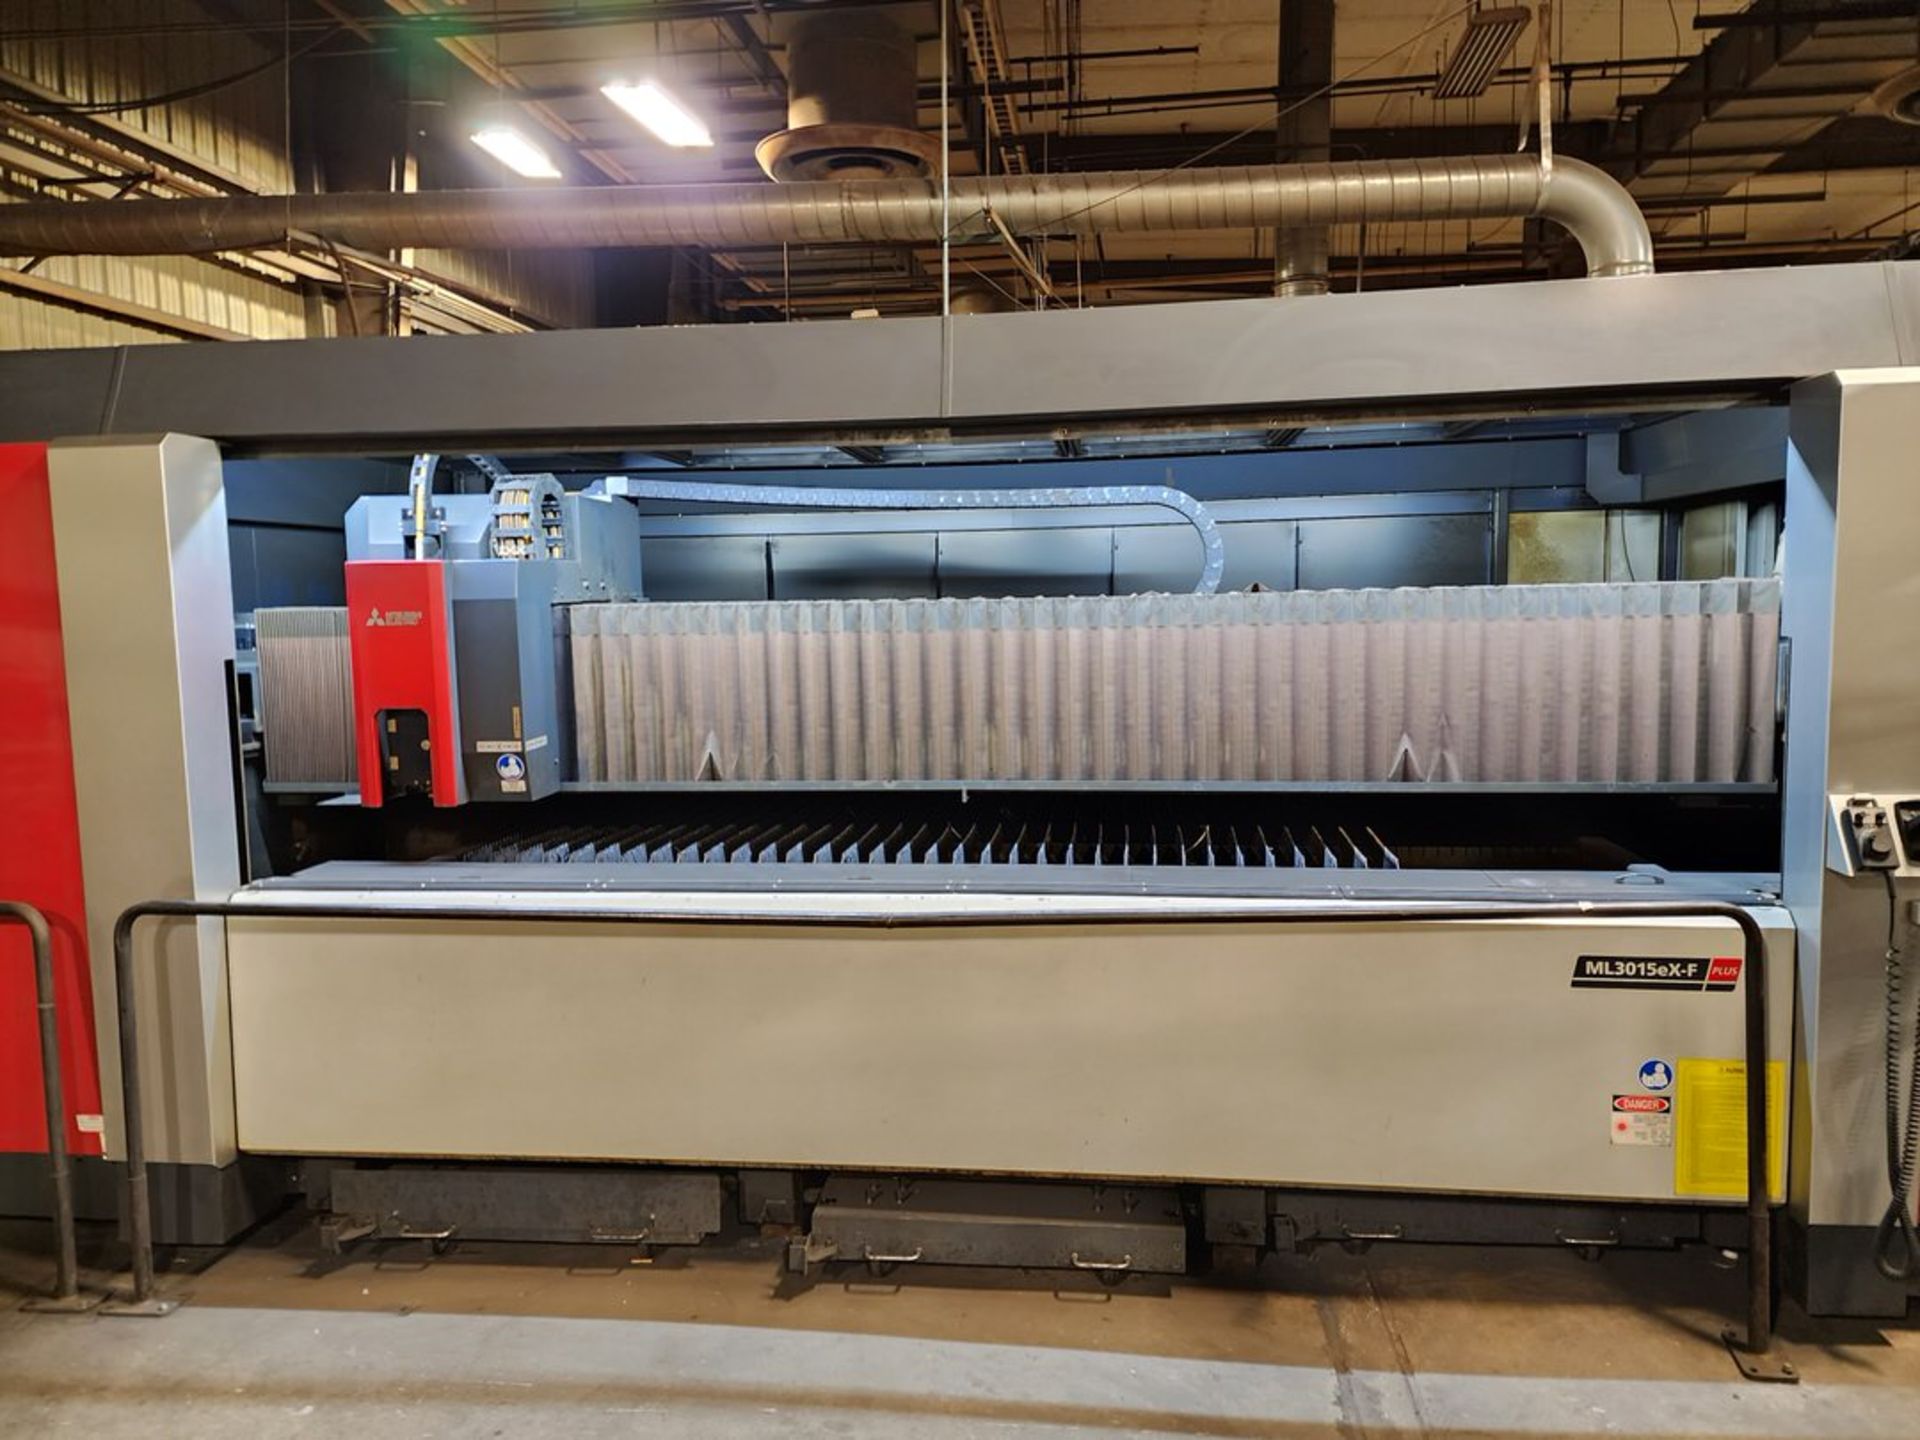 2016 MITSUBISHI ML3015EX-F40(S) FIBER LASER, 5' X 10' WITH DUAL CART LOAD AND UNLOAD CELL - Image 16 of 81